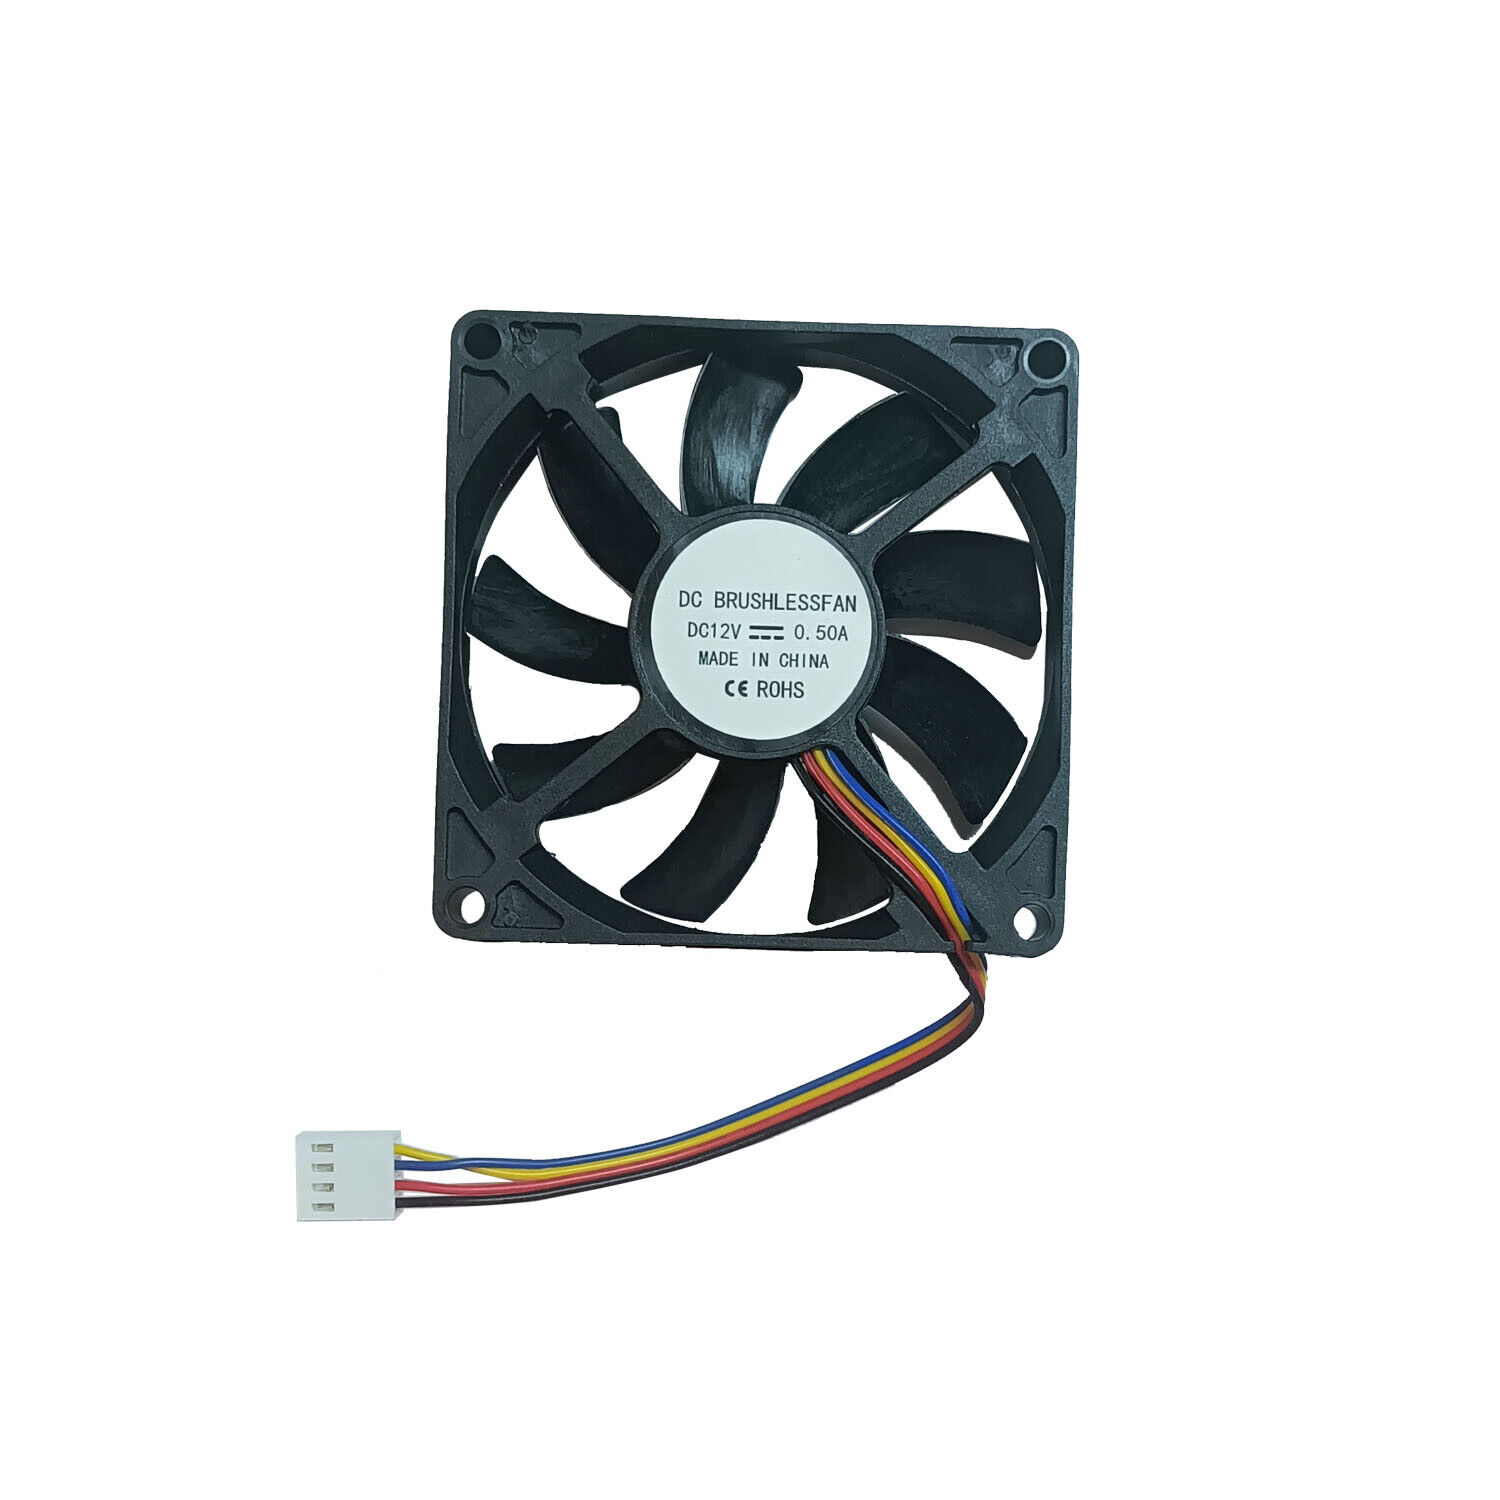 Cooling Fan 4-Pin DC 12V 0.5A Replacement for Delta EFC0812DB 80x80x15mm